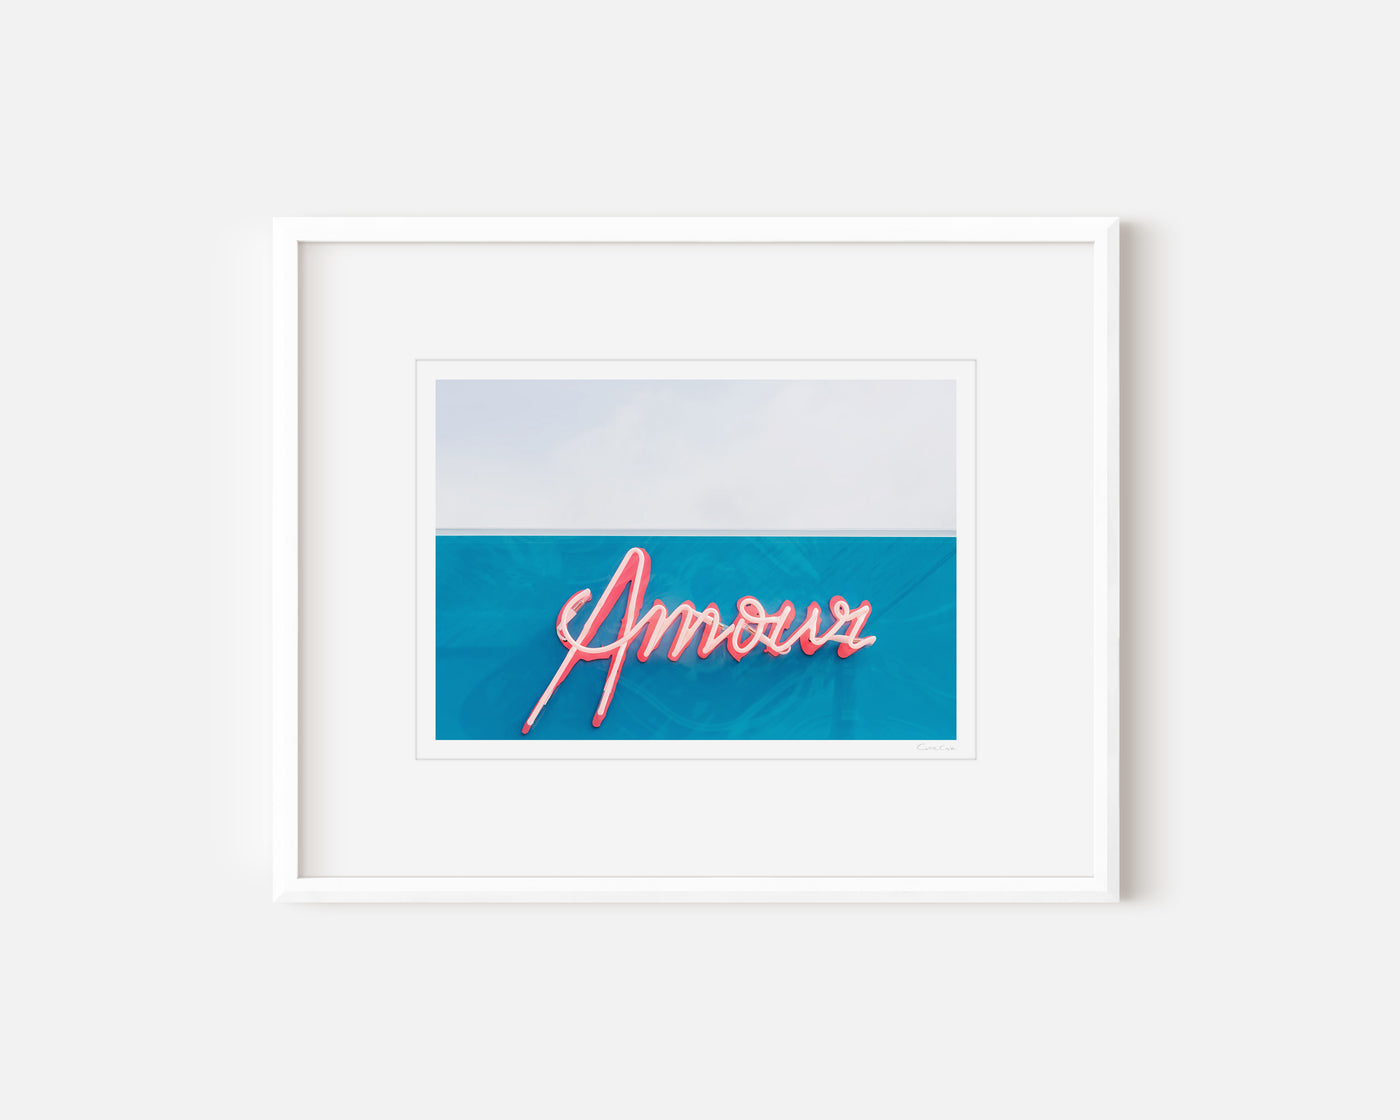 Amour - Art print by Cattie Coyle Photography in white frame